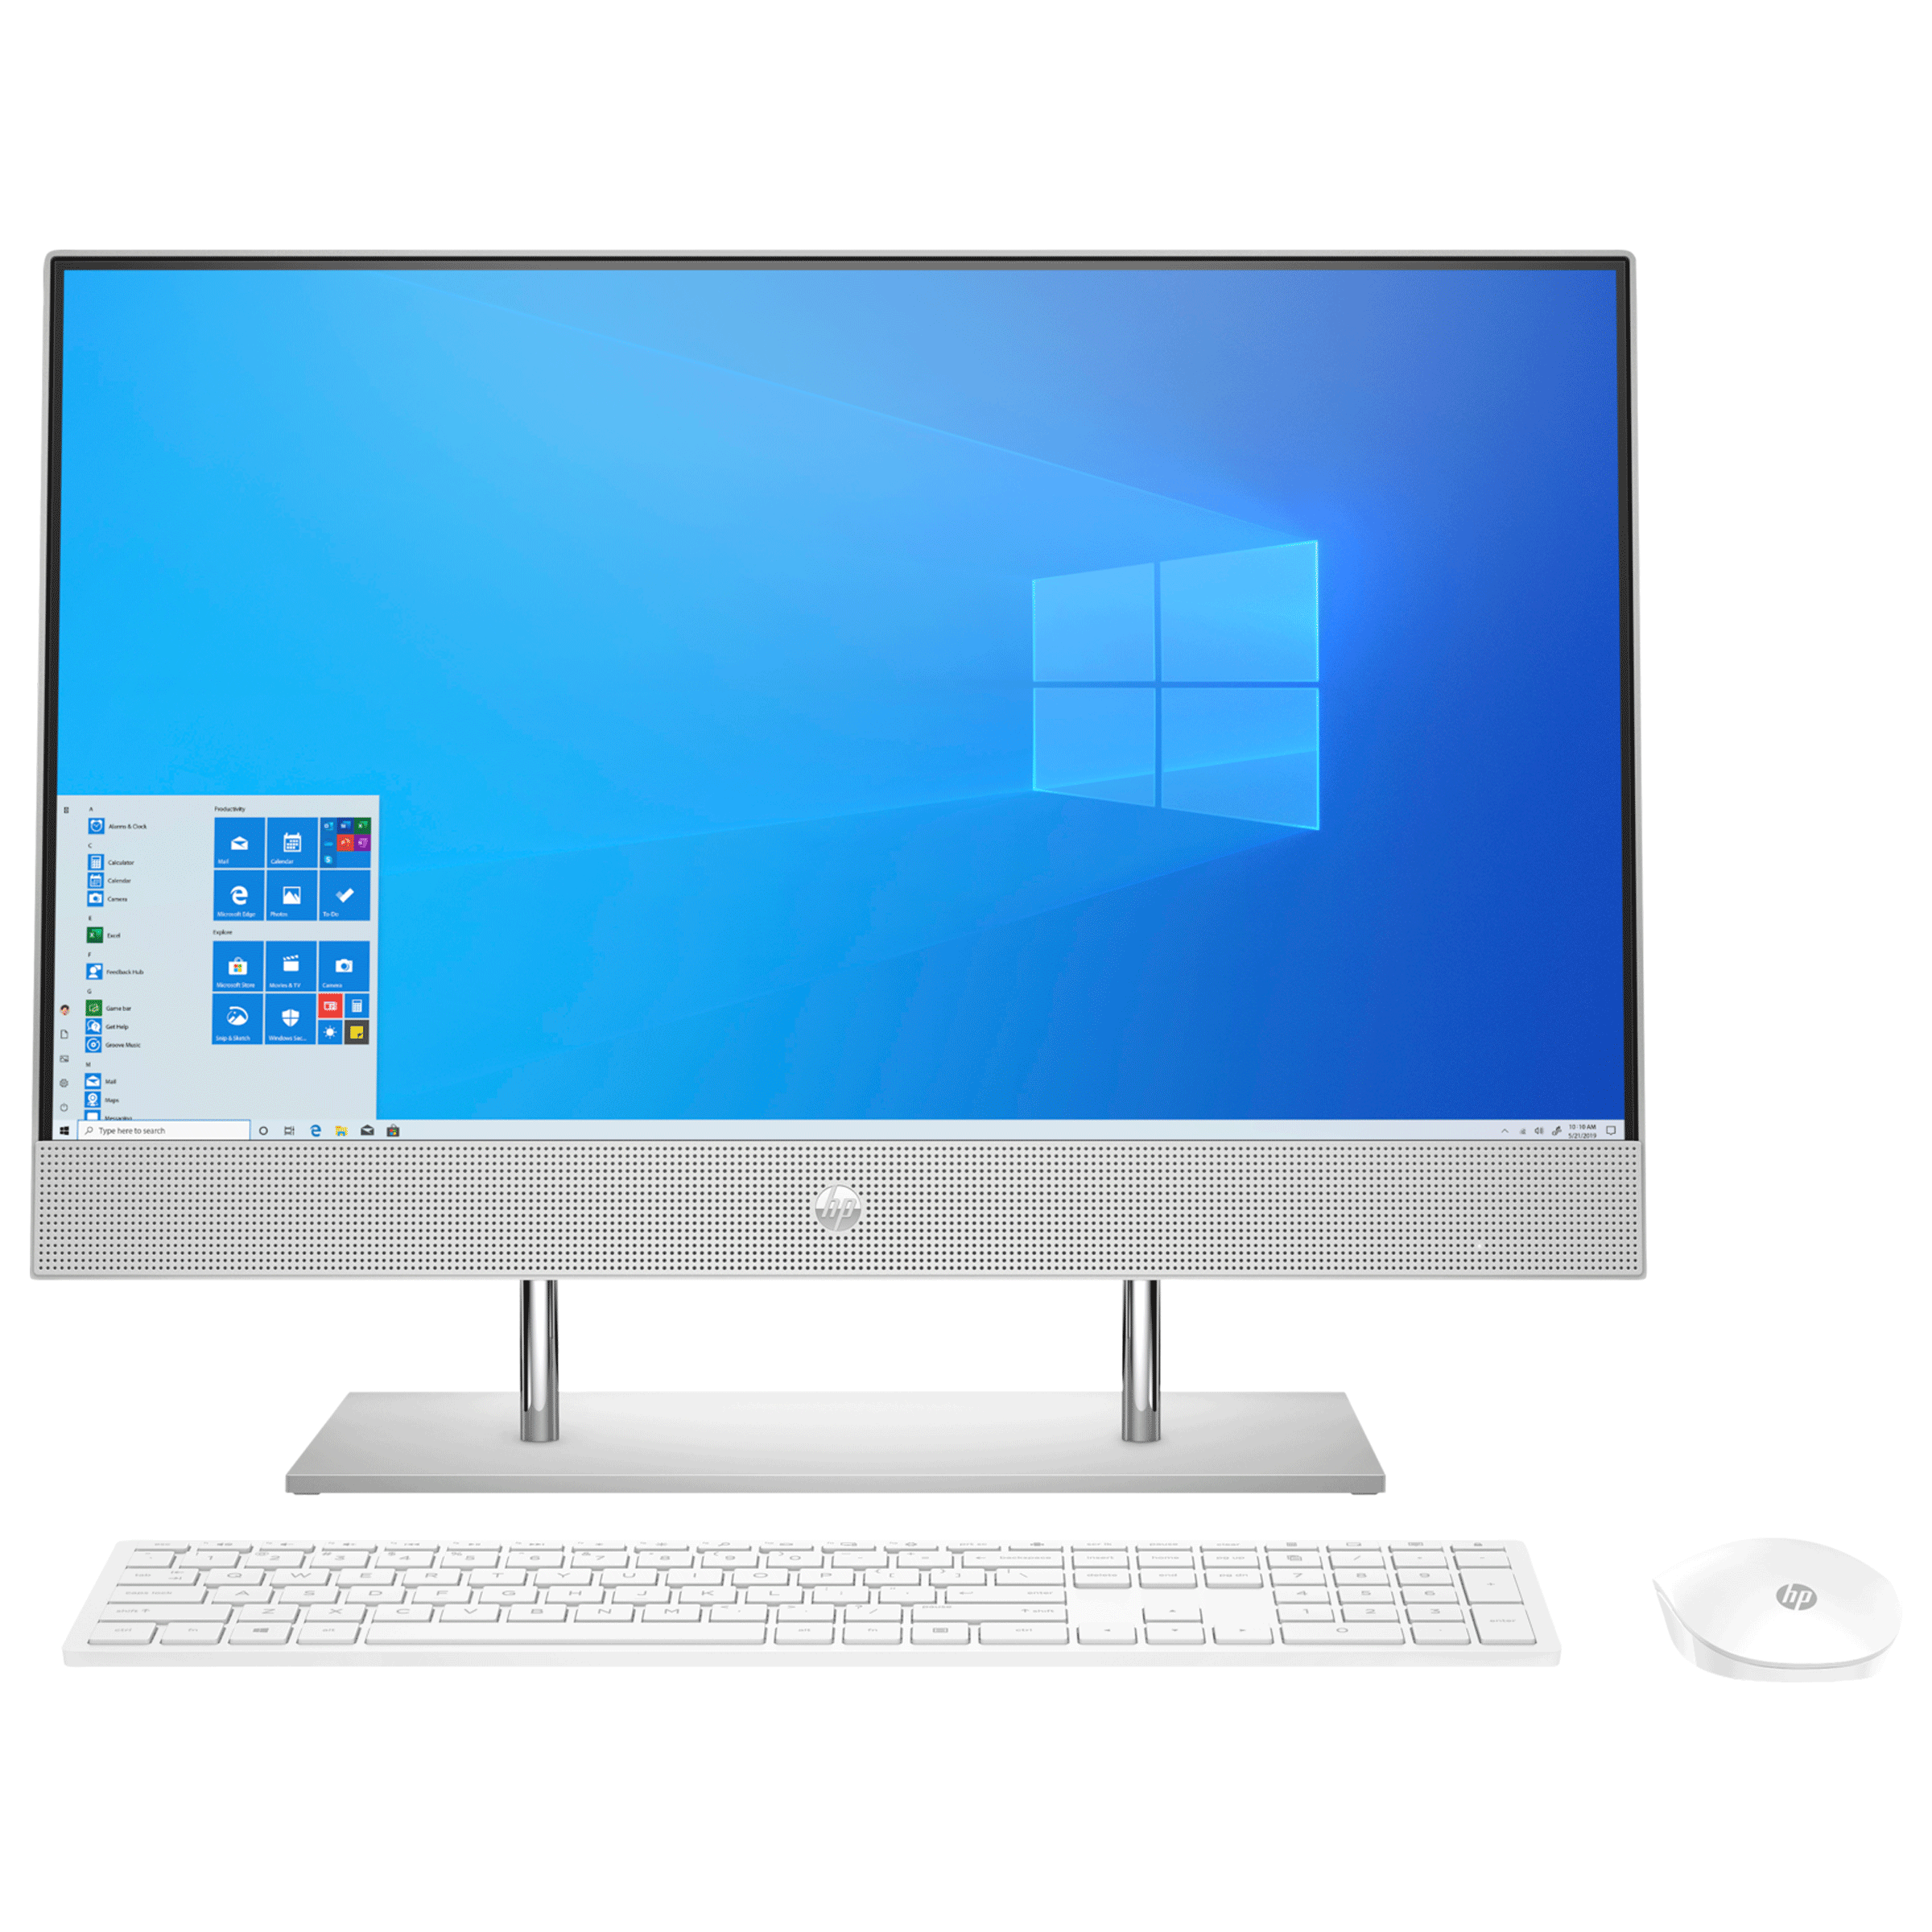 HP 24-DP0788IN Ryzen 3 Windows 10 Home All in One Desktop (8GB RAM, 1TB HDD, 256GB SSD, AMD Radeon + Shared Graphics, MS Office, 60.5cm, 4V9H6PA, Natural Silver)_1